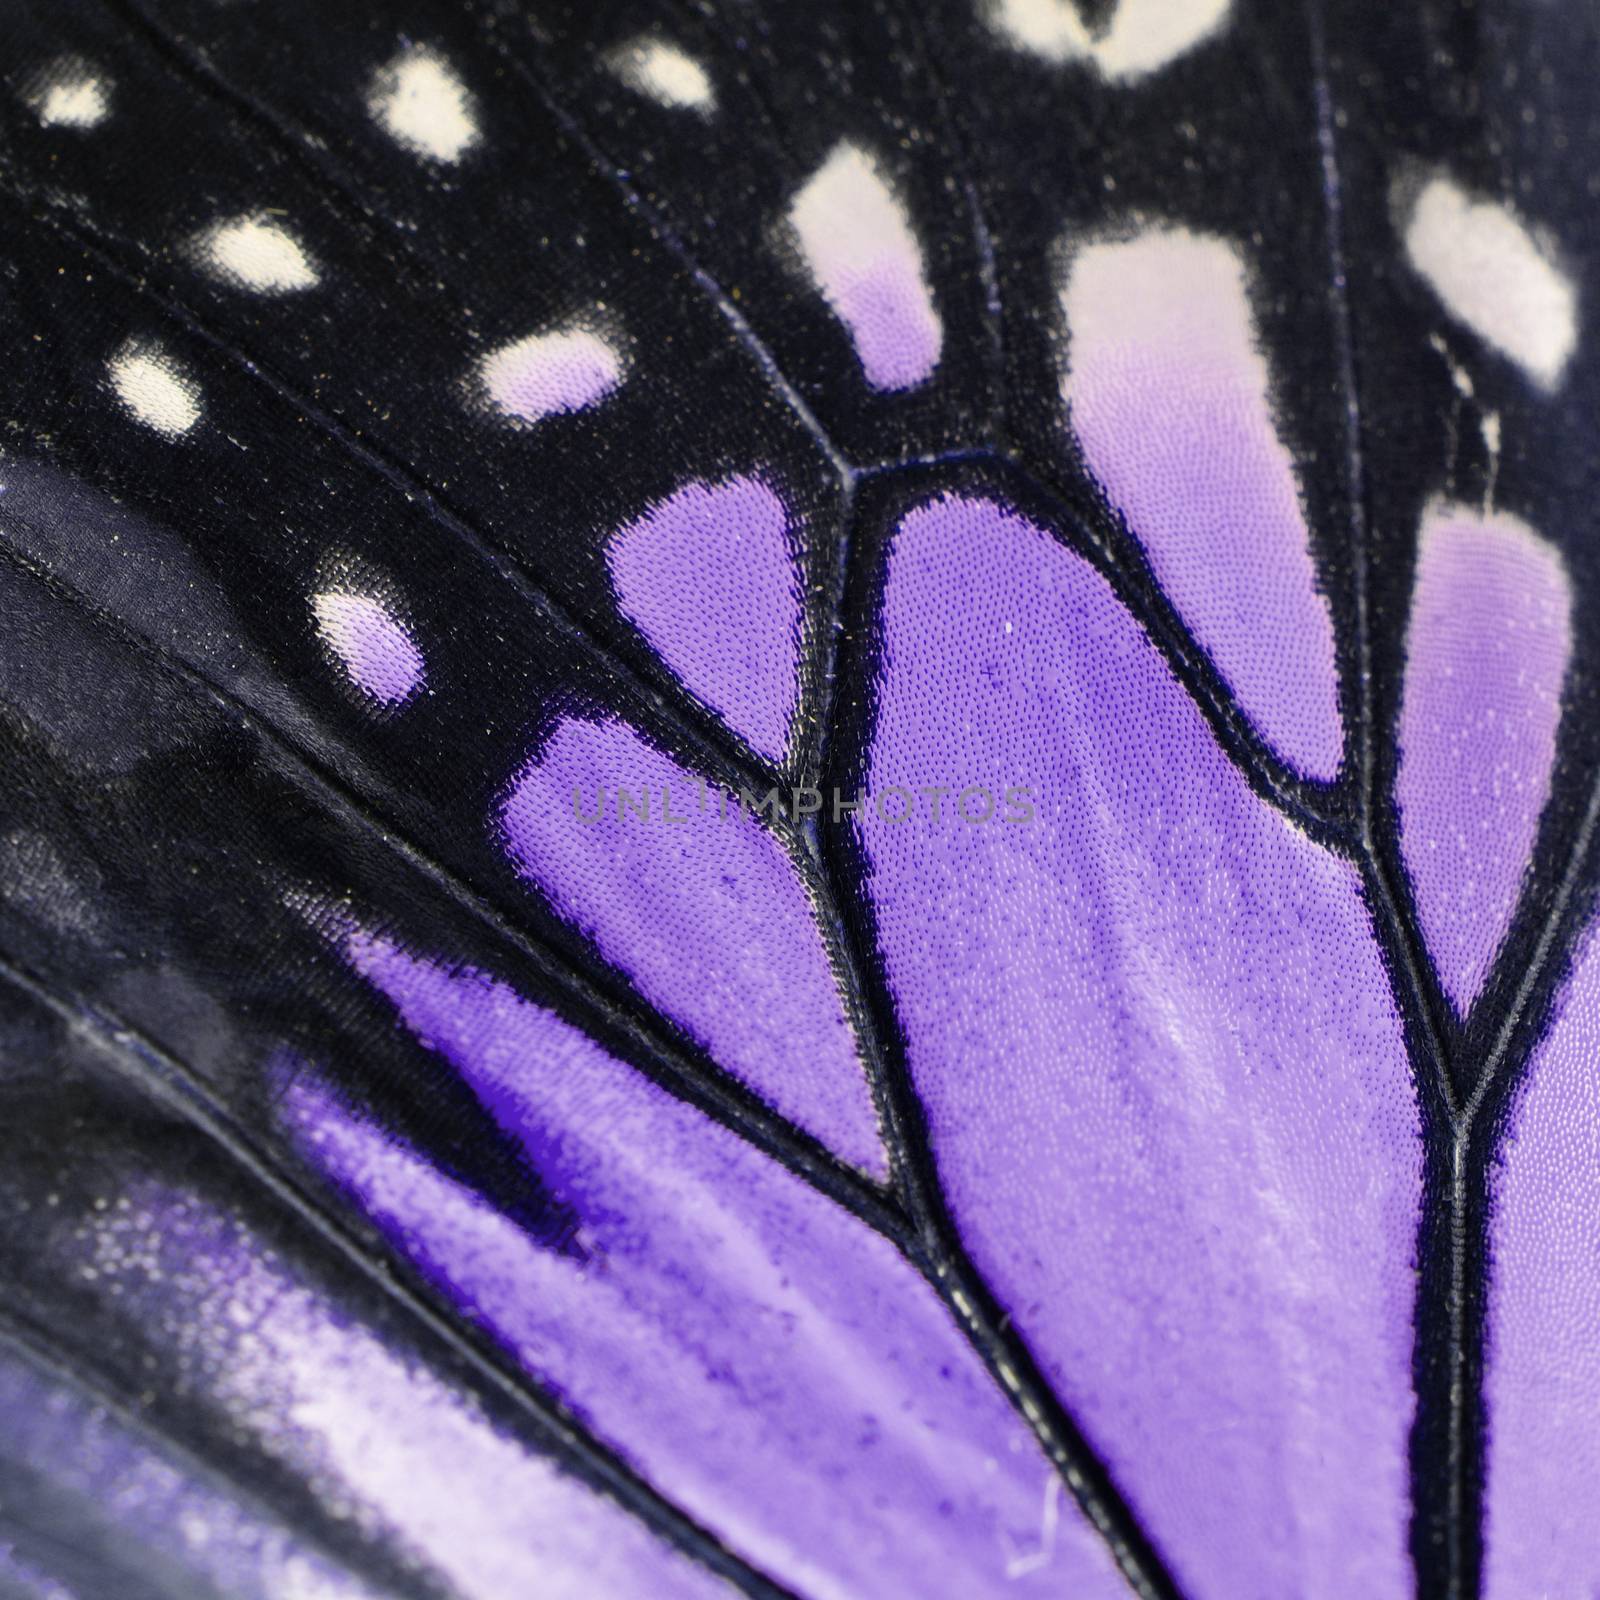 Nature texture, derived from purple butterfly wing background